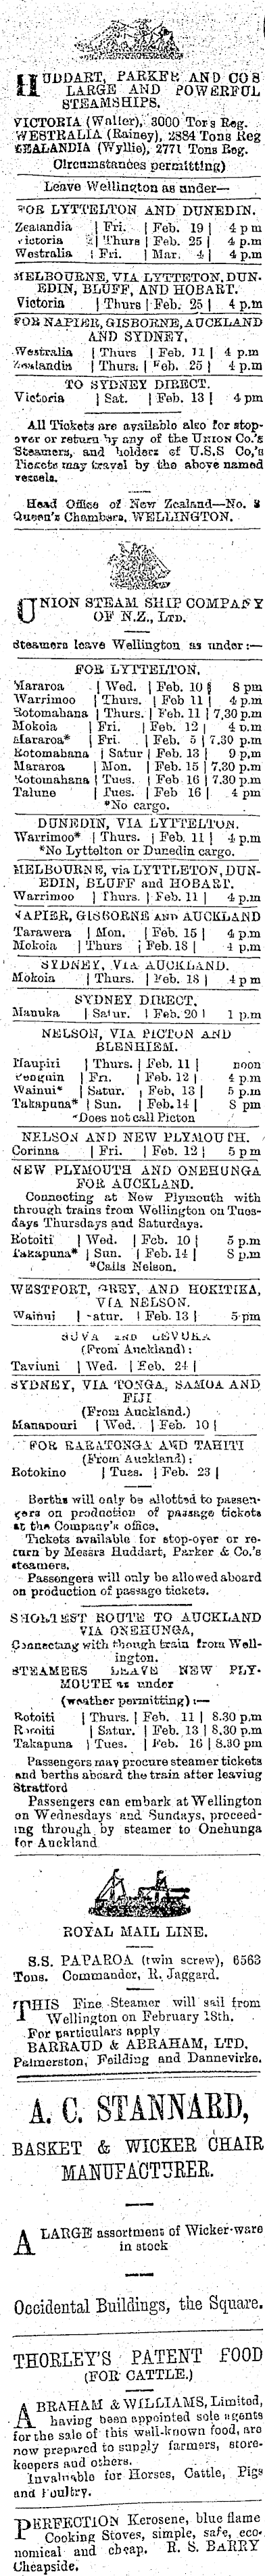 Papers Past Newspapers Manawatu Standard 11 February 1904 Page 7 Advertisements Column 1